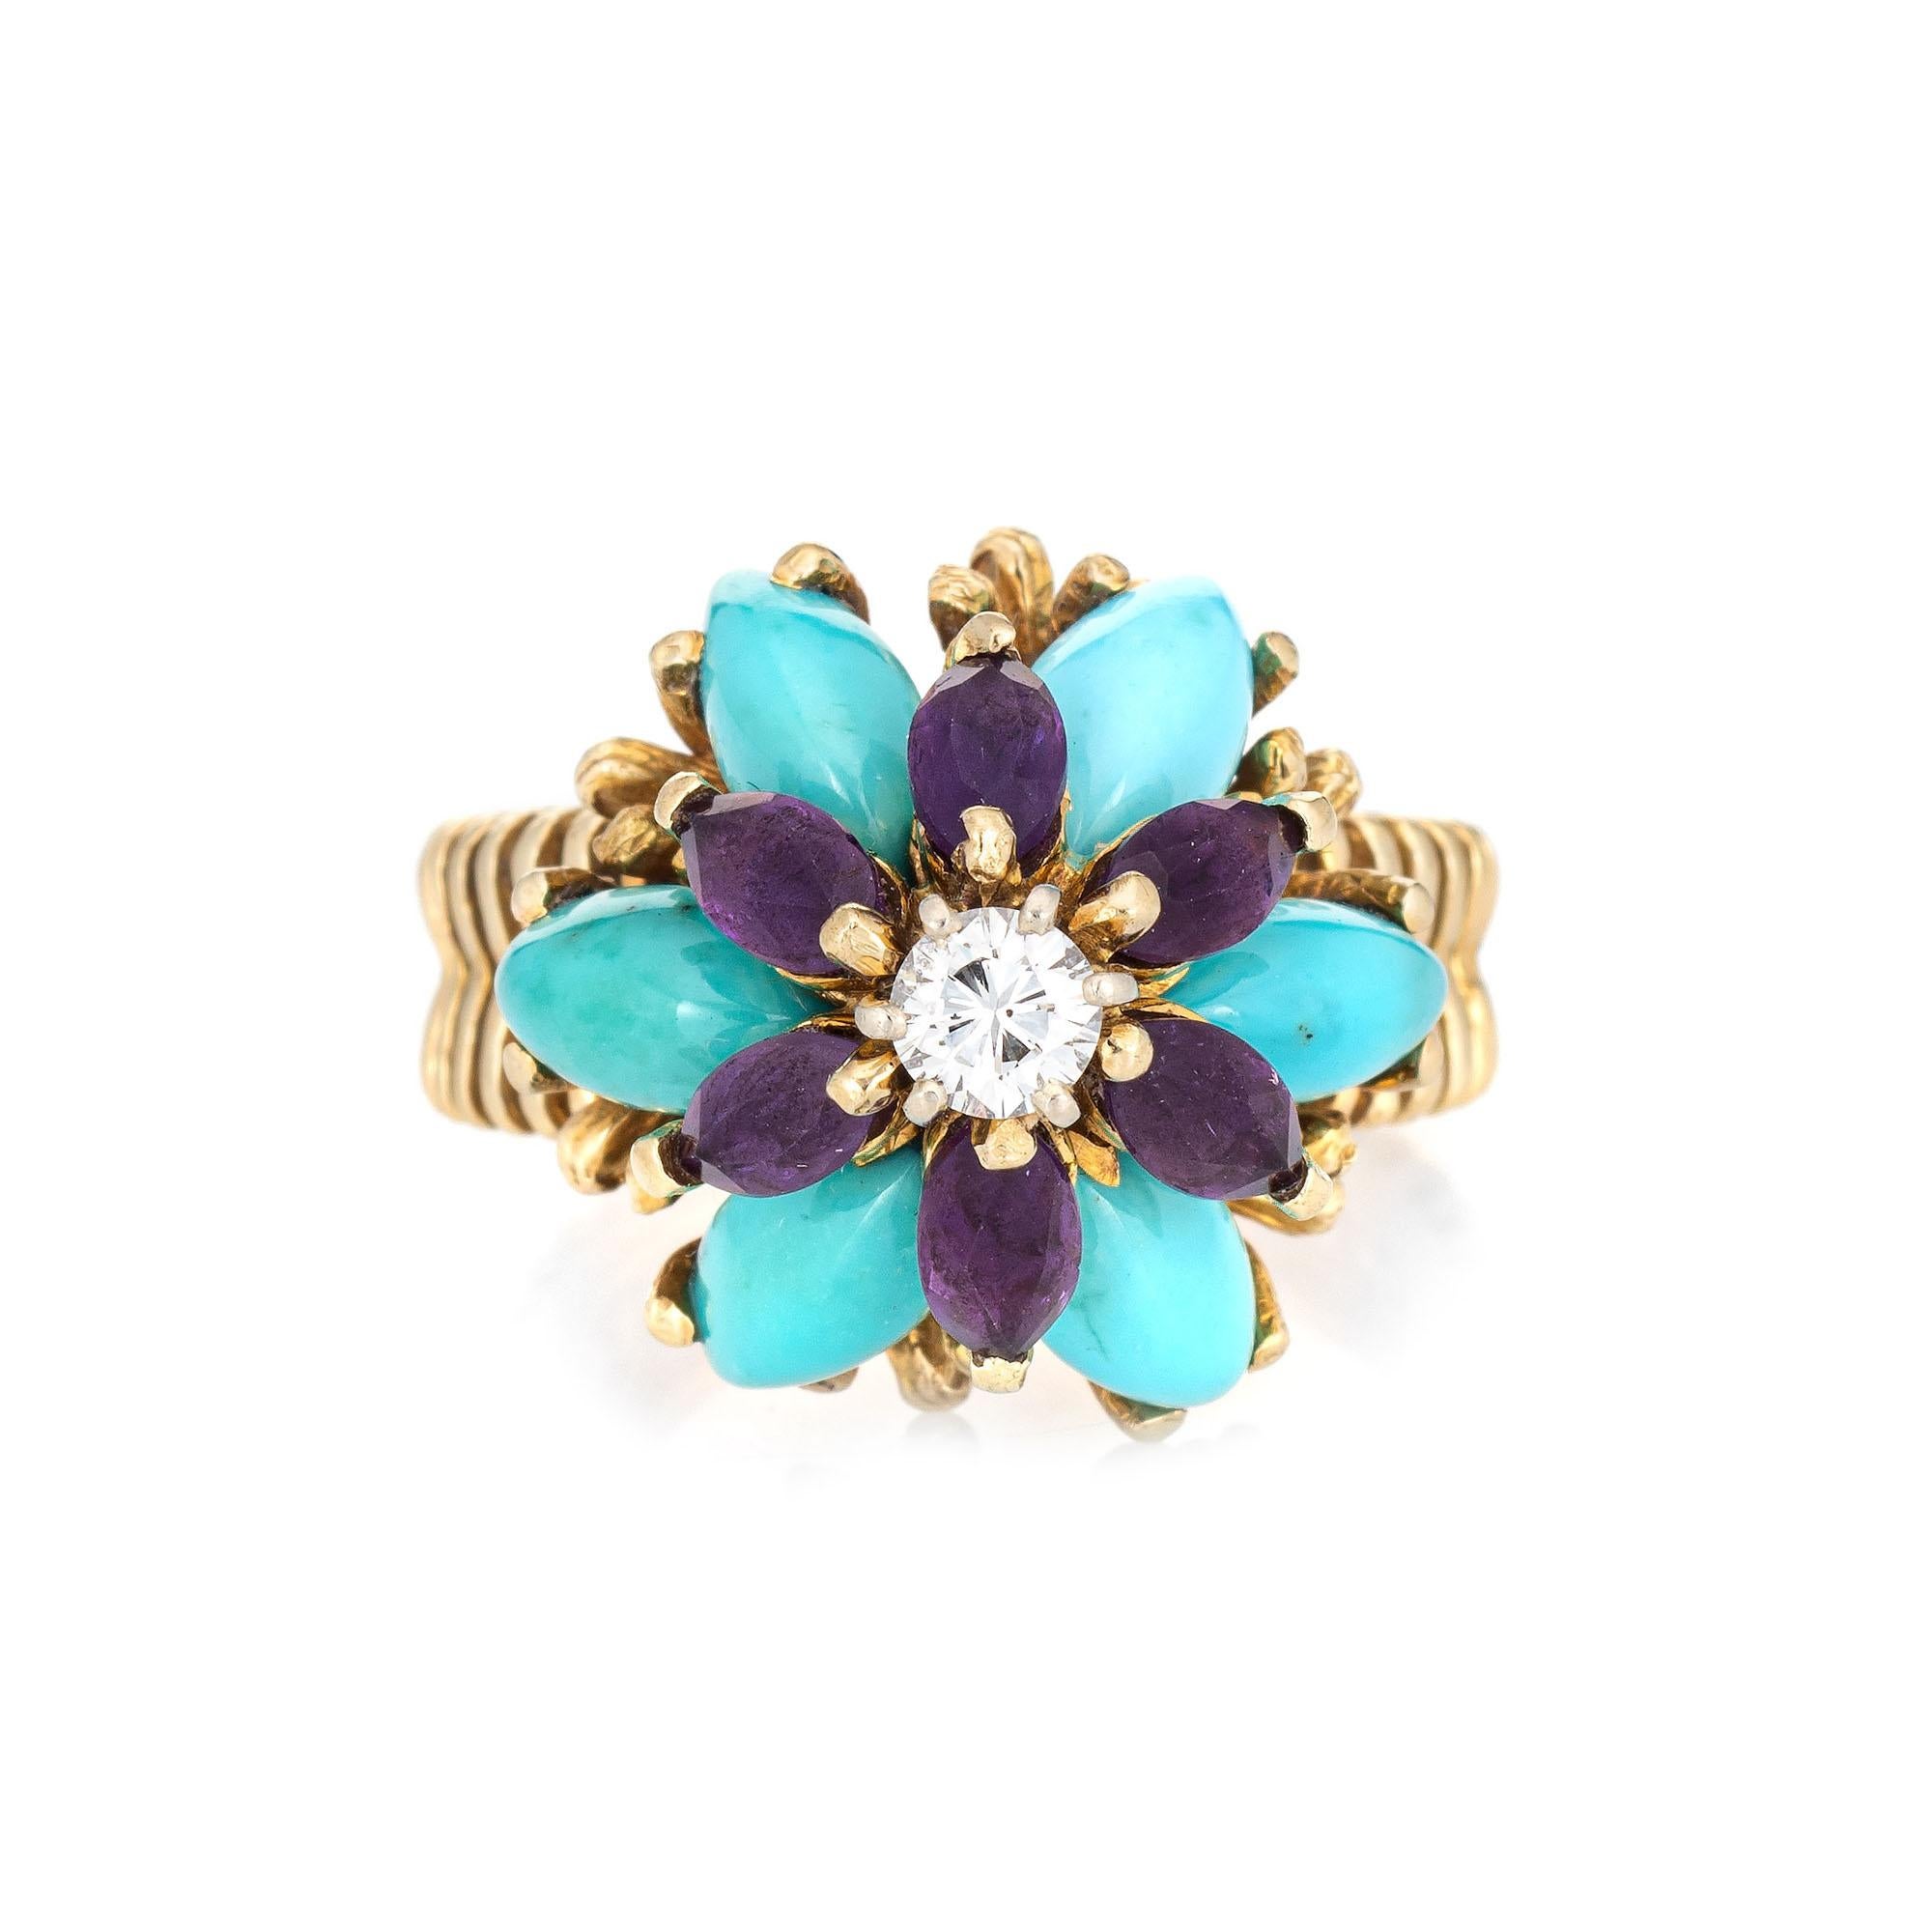 Stylish vintage turquoise & amethyst, diamond ring crafted in 14 karat yellow gold (circa 1960s). 

Round brilliant cut diamond is estimated at 0.35 carats (estimated at H-I color and SI2 clarity). Cabochon cut turquoise measures 9mm x 4mm